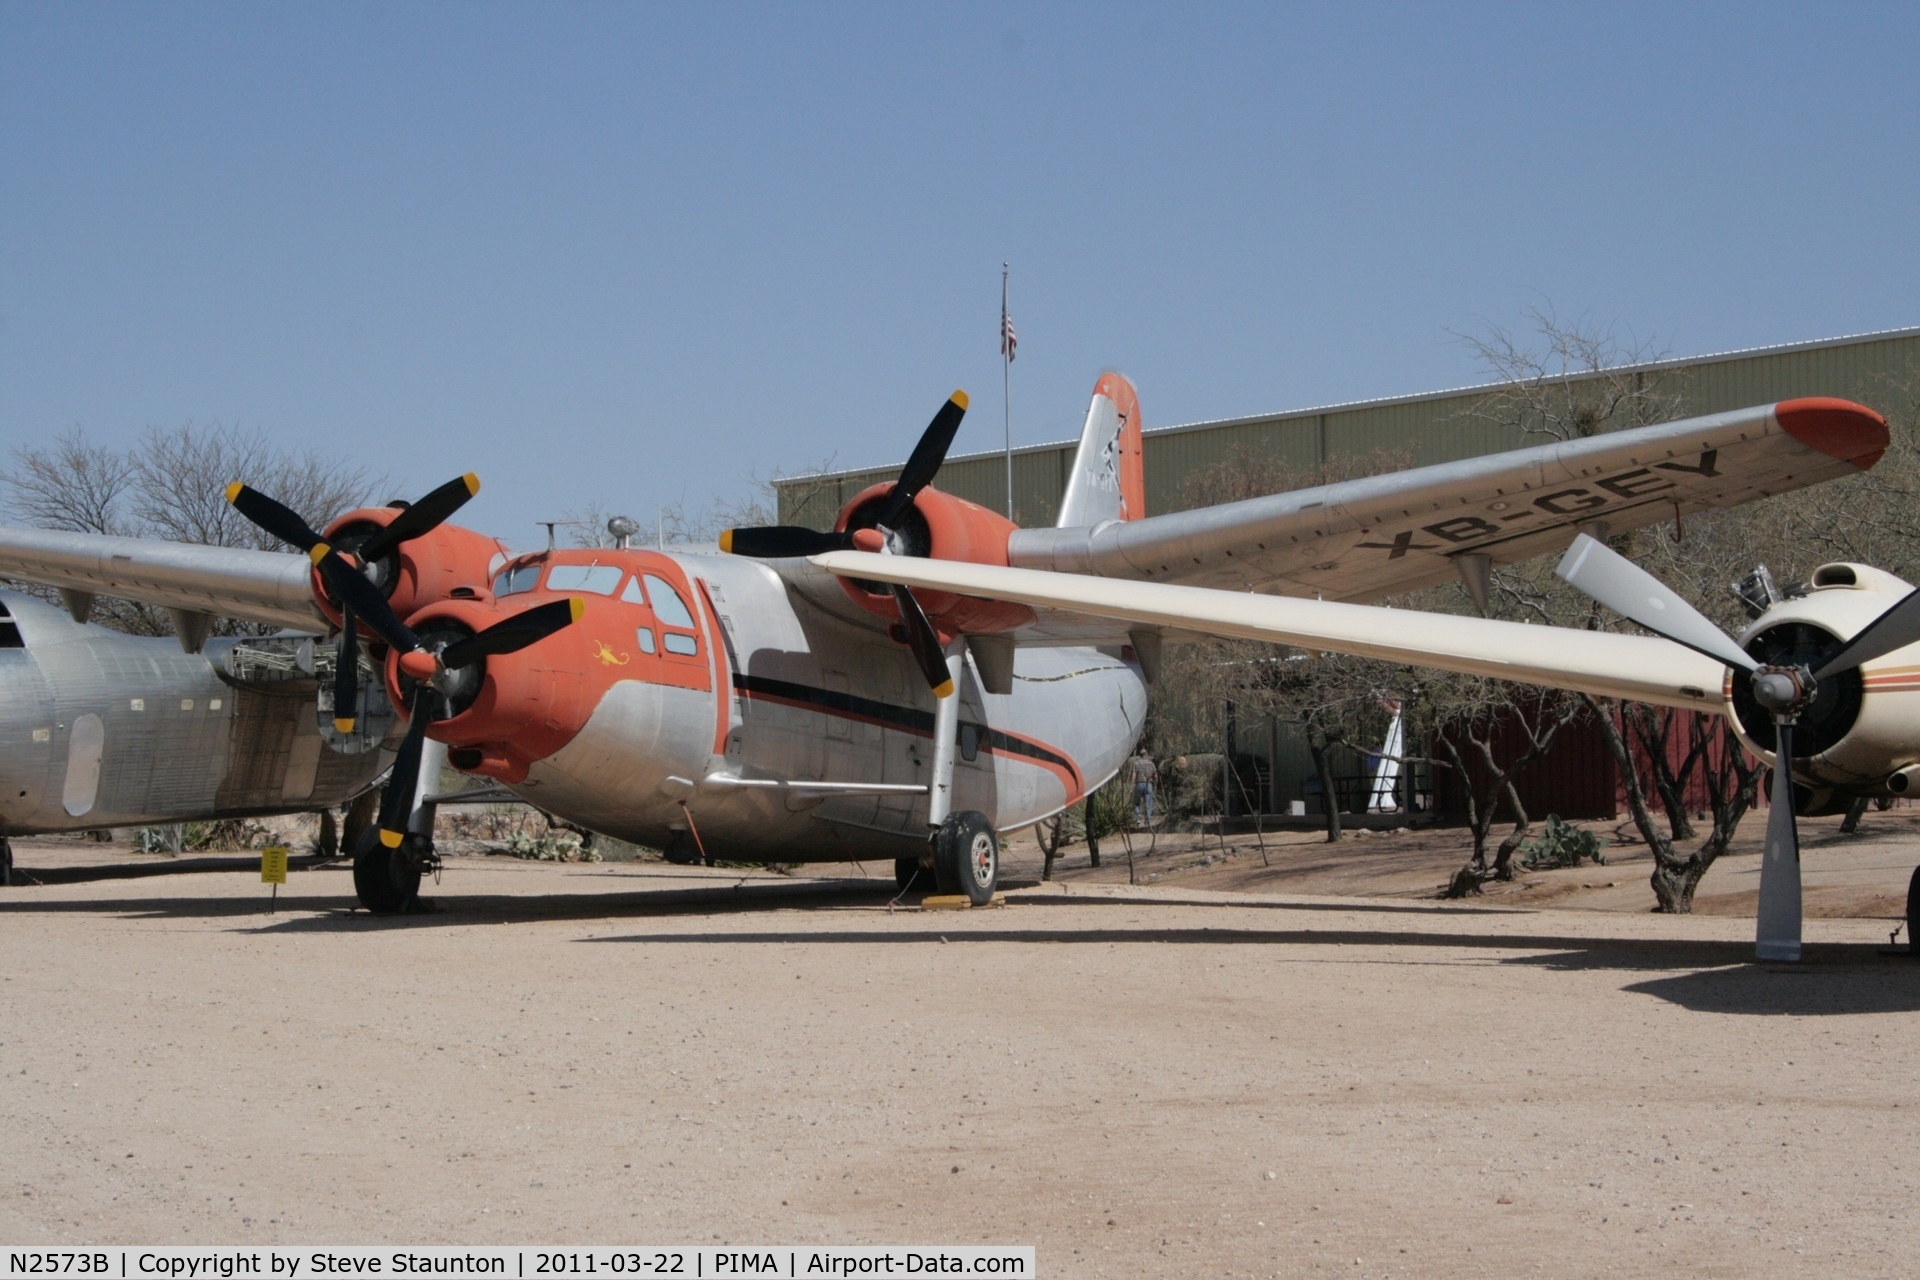 N2573B, 1948 Northrop YC-125A Raider C/N 48636 (2520), Taken at Pima Air and Space Museum, in March 2011 whilst on an Aeroprint Aviation tour